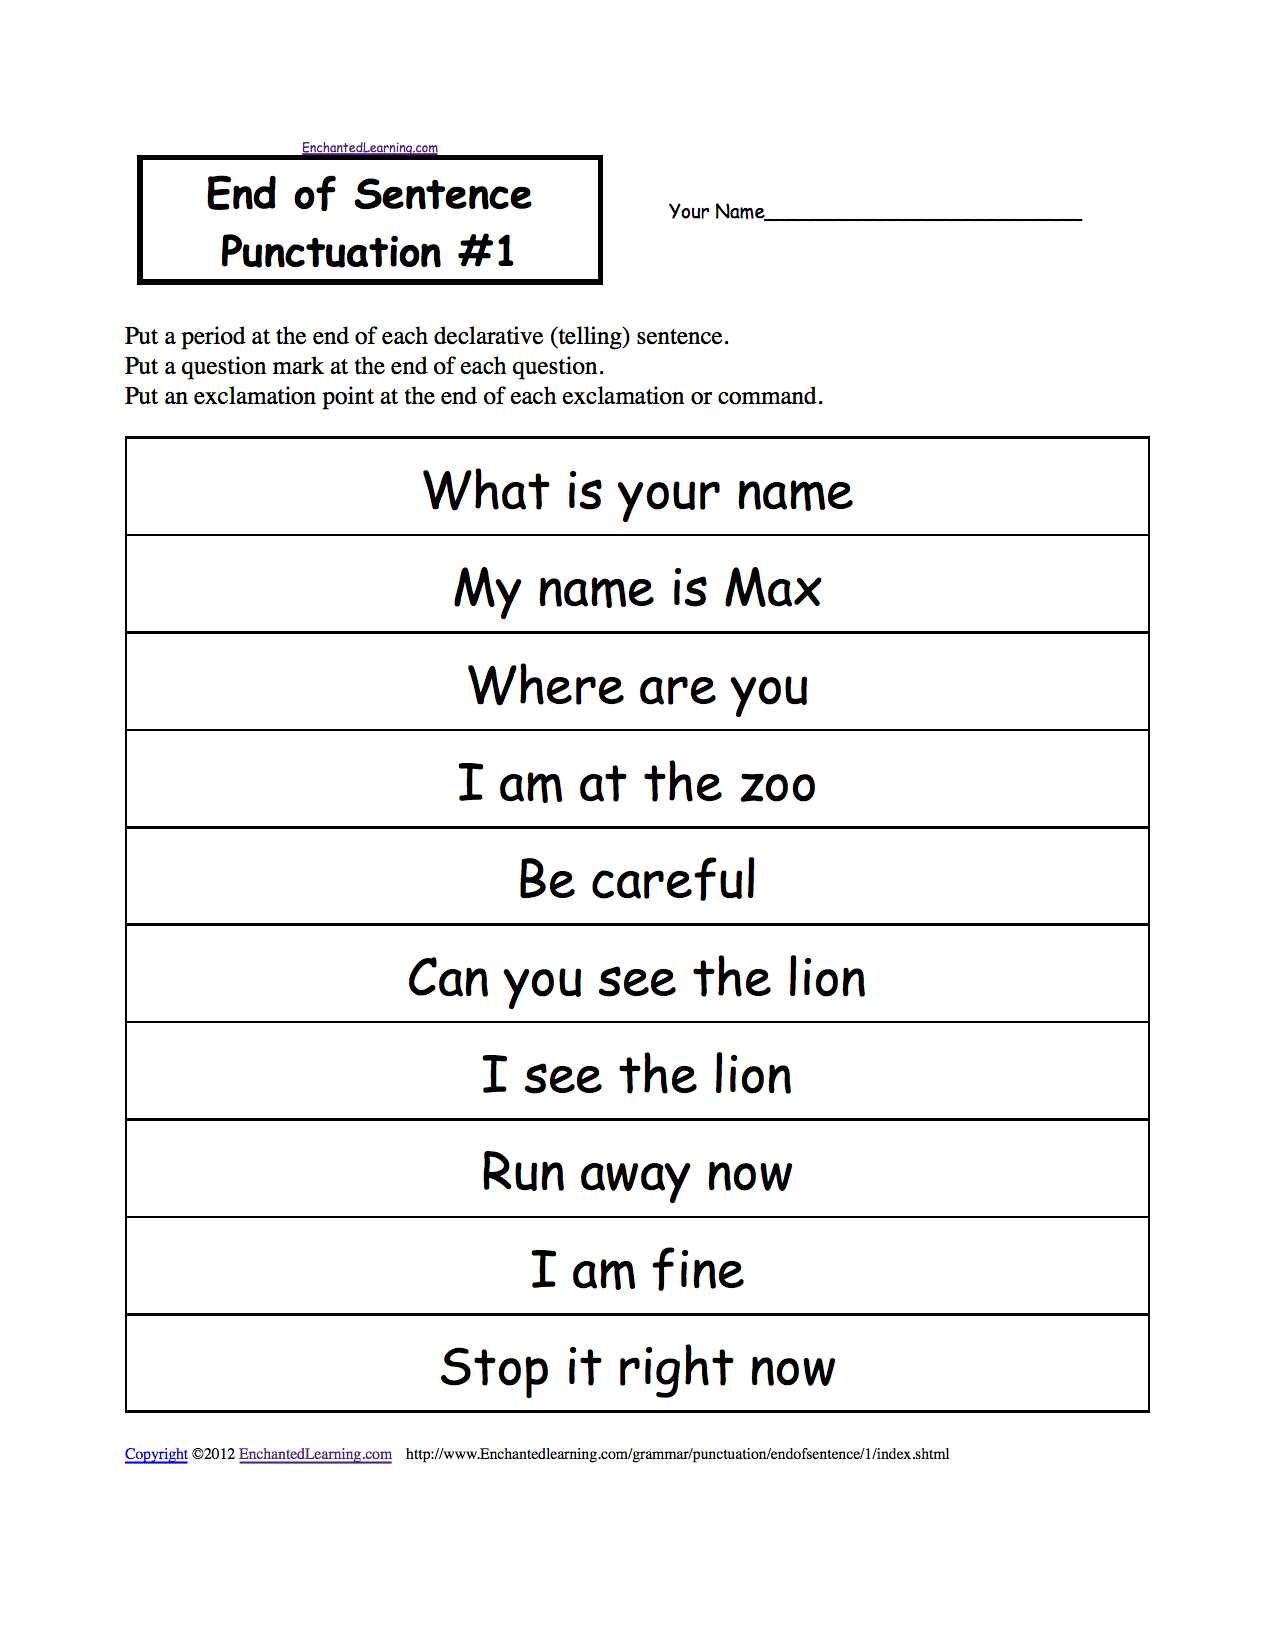 Free Sentence Scramble Worksheets Also End Of Sentence Punctuation Worksheets even Different themes and